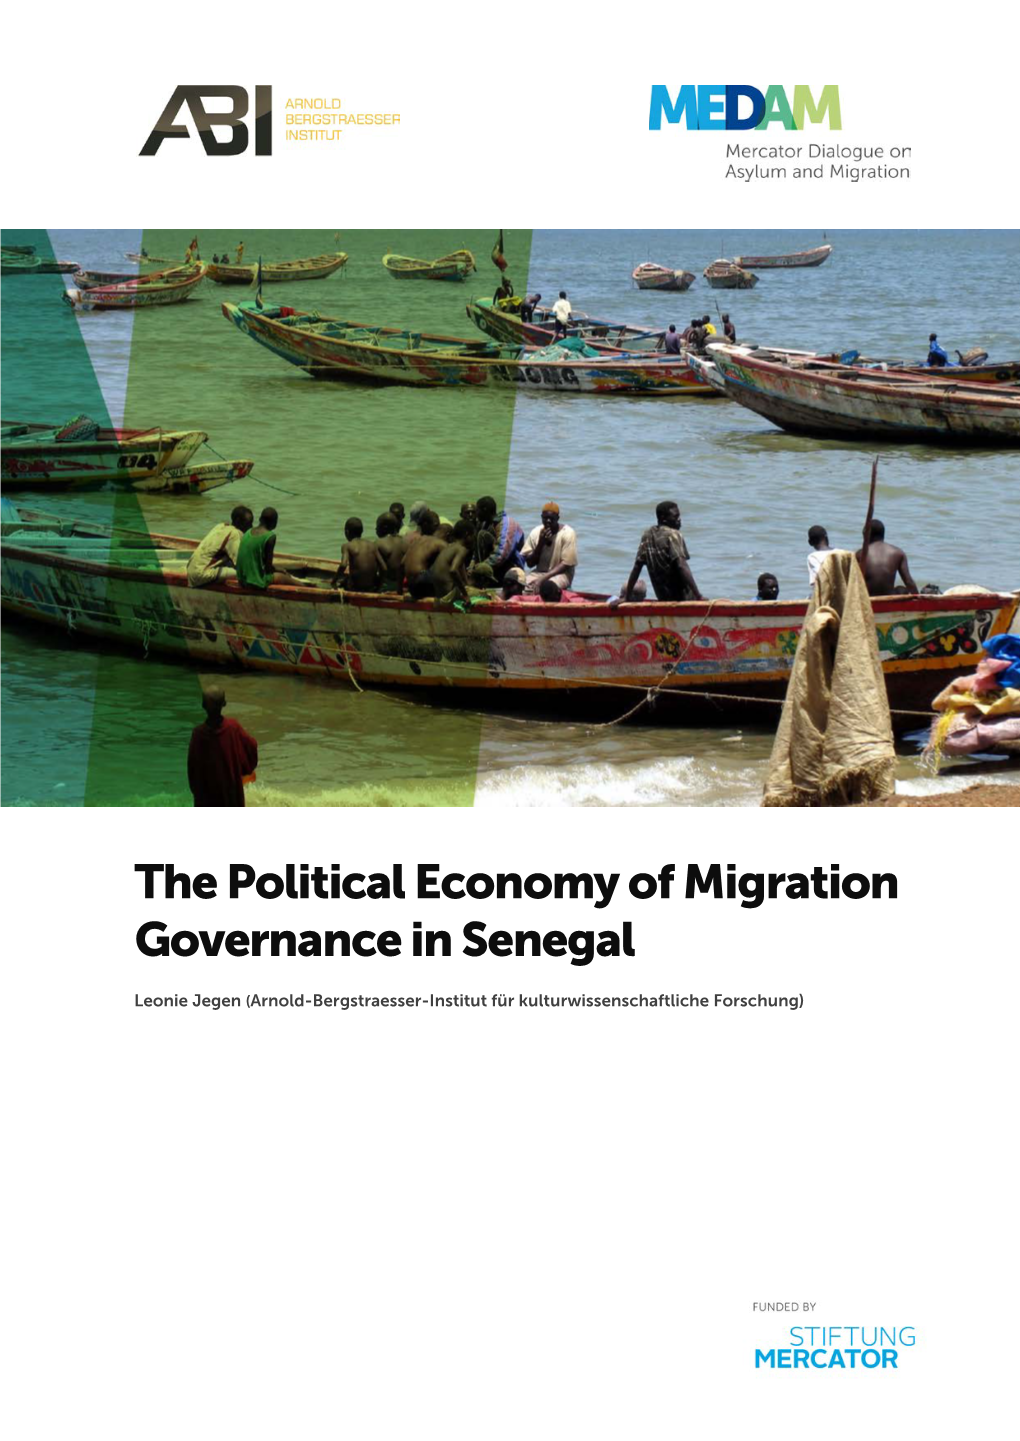 The Political Economy of Migration Governance in Senegal